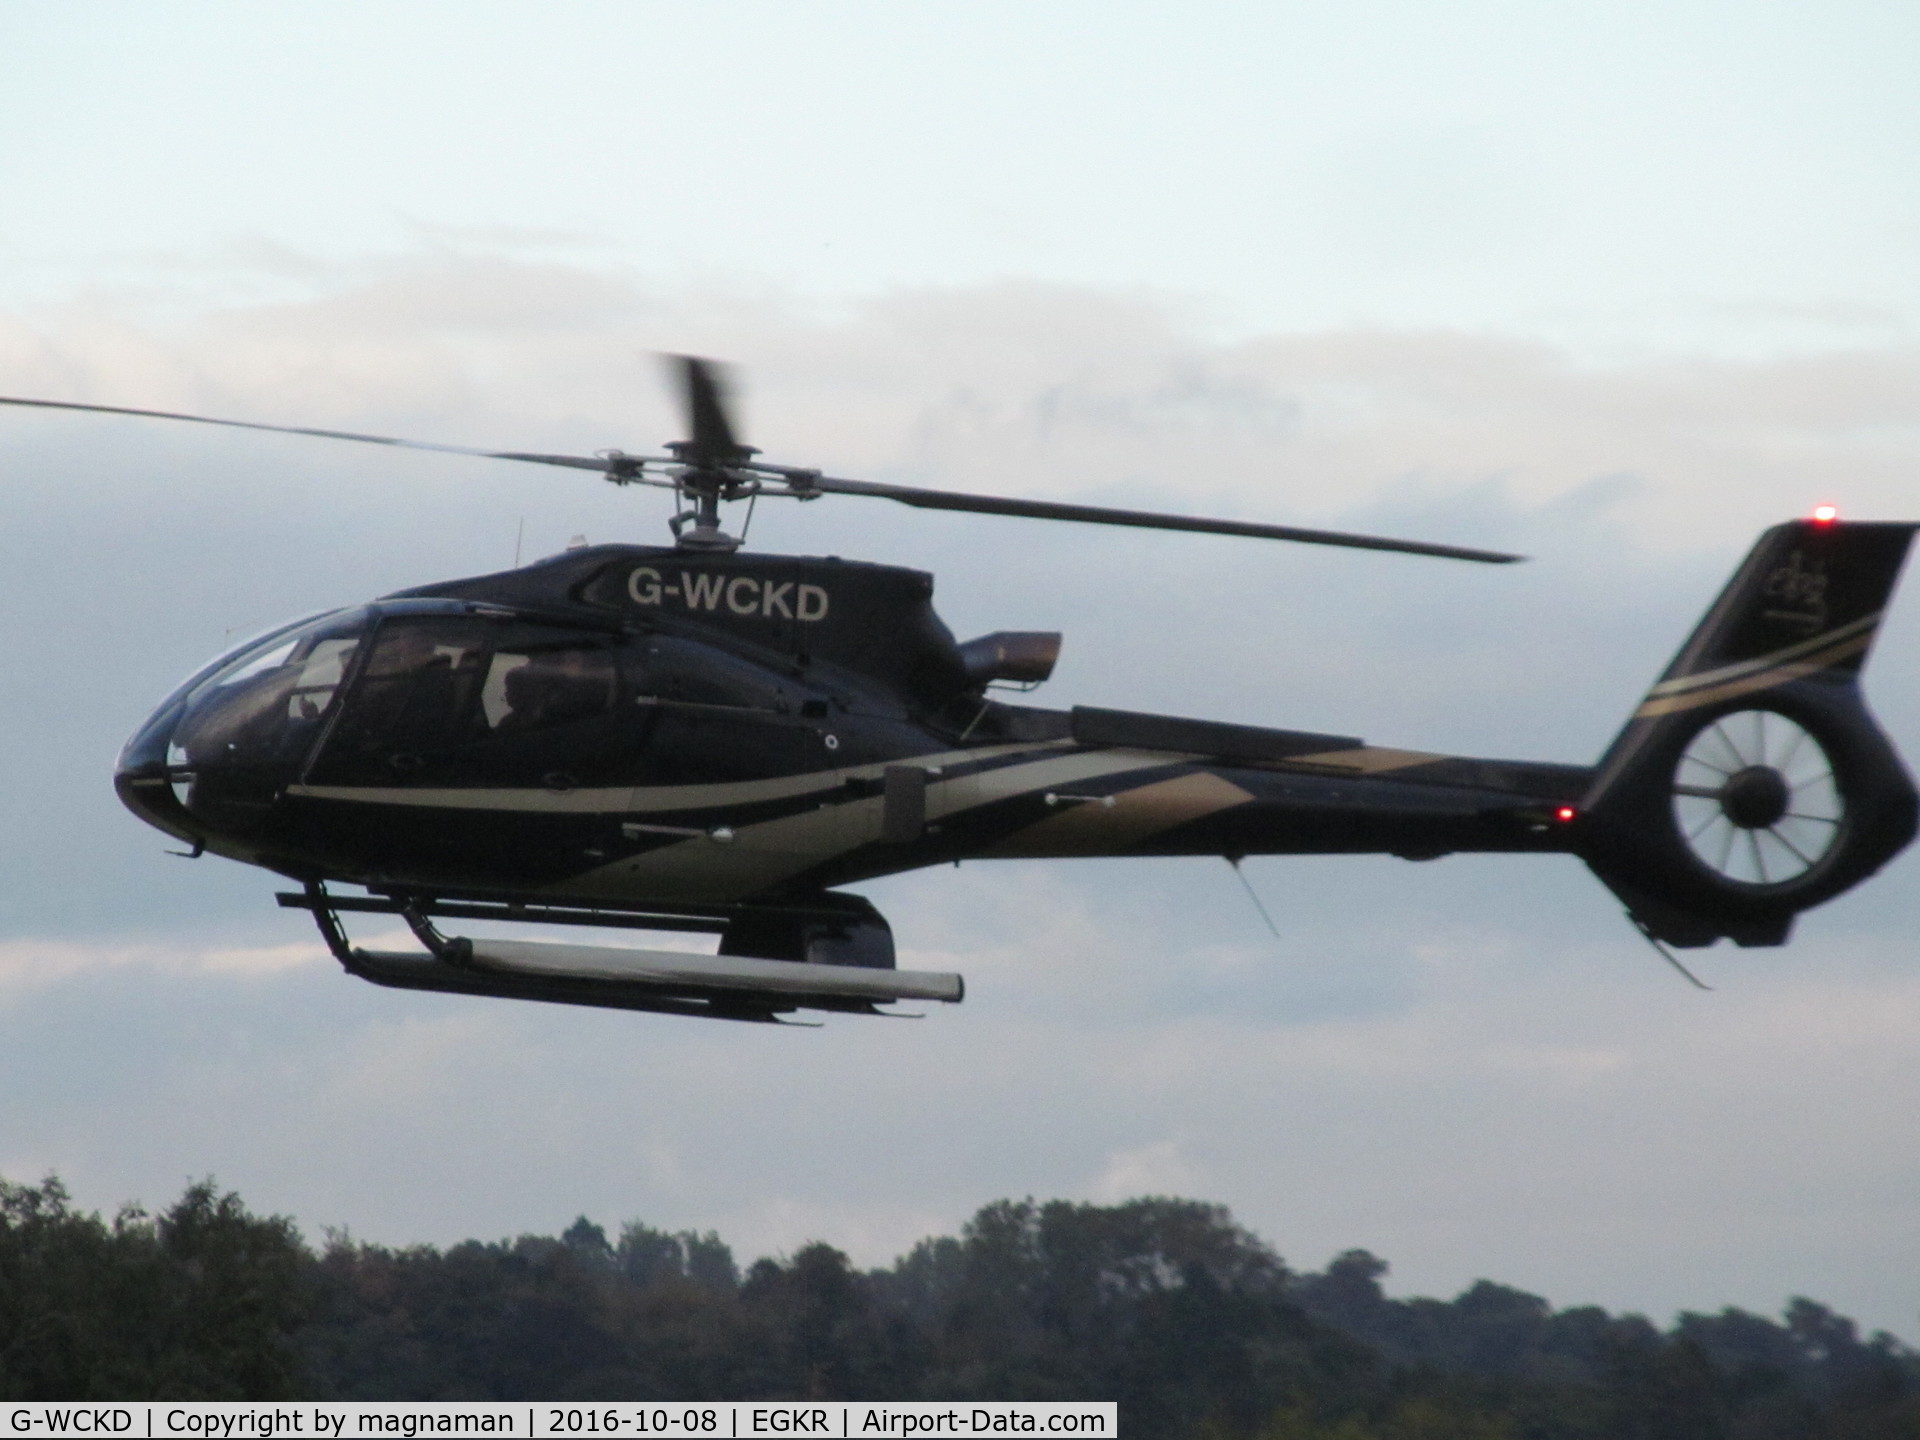 G-WCKD, 2009 Eurocopter EC-130B-4 (AS-350B-4) C/N 4746, coming in to land